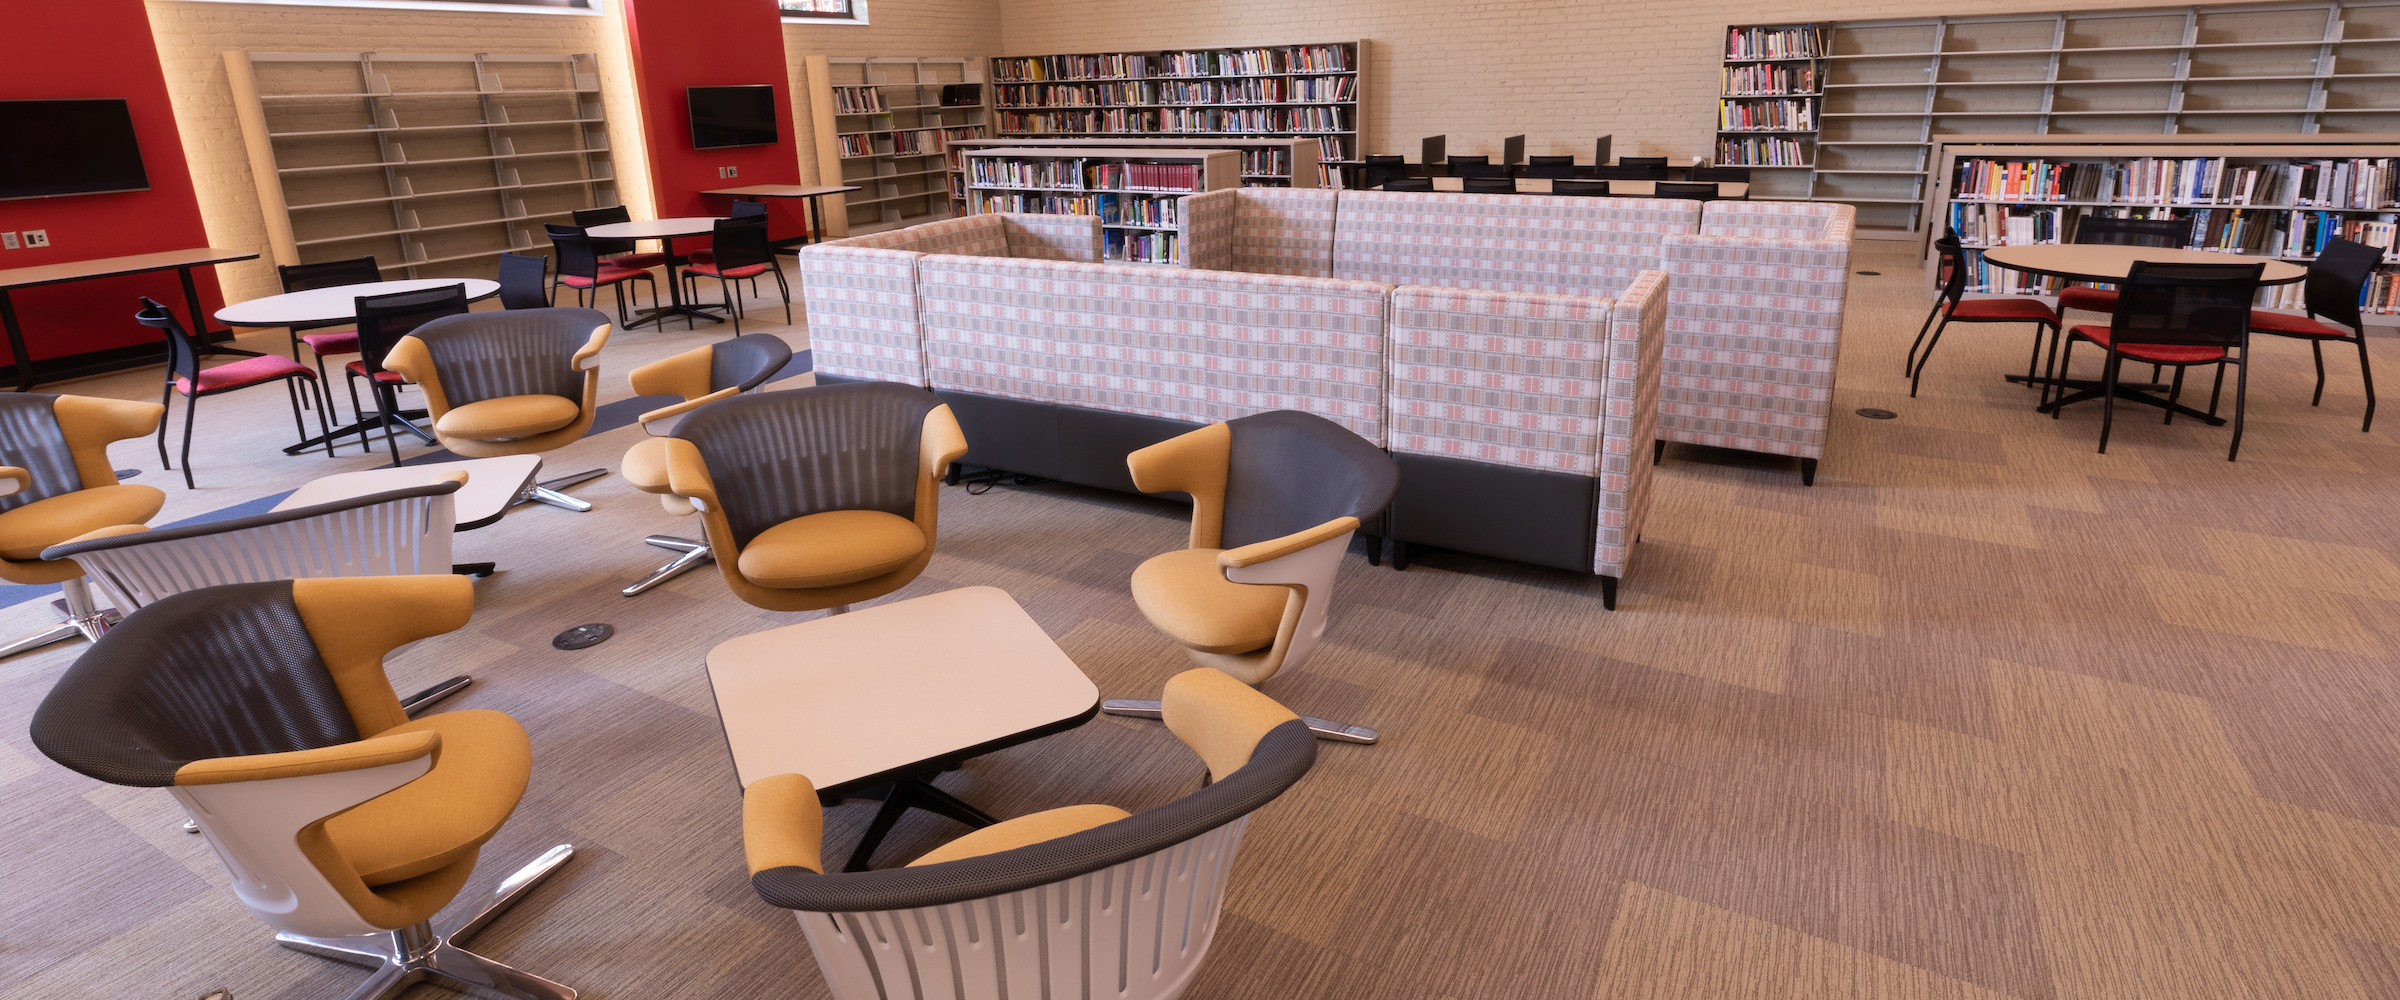 Learning Commons and Welcome Center   08162018